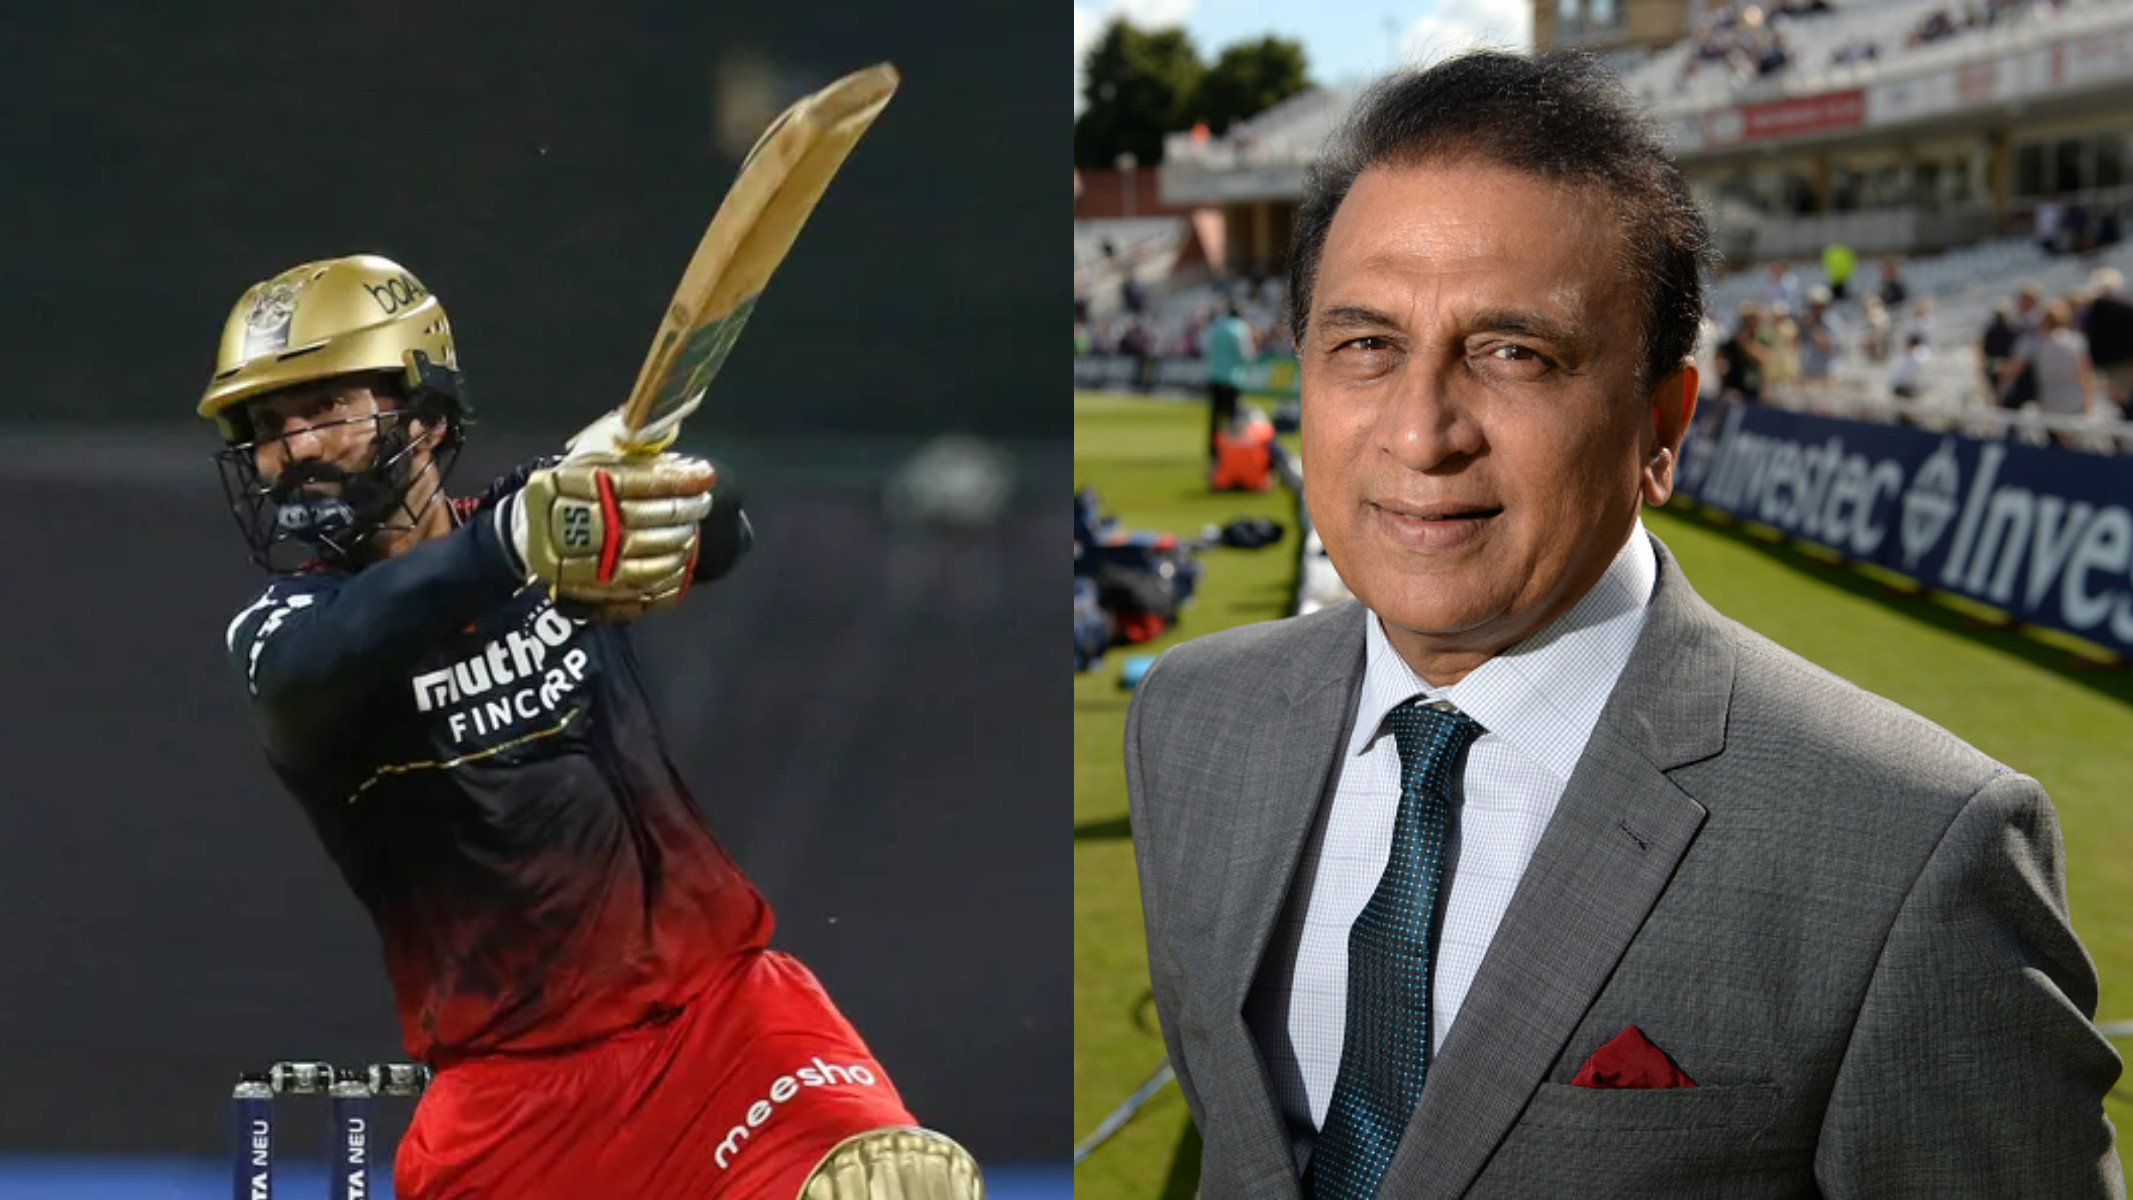 IPL 2022: Sunil Gavaskar suggests Dinesh Karthik’s inclusion in Indian team for T20 World Cup 2022